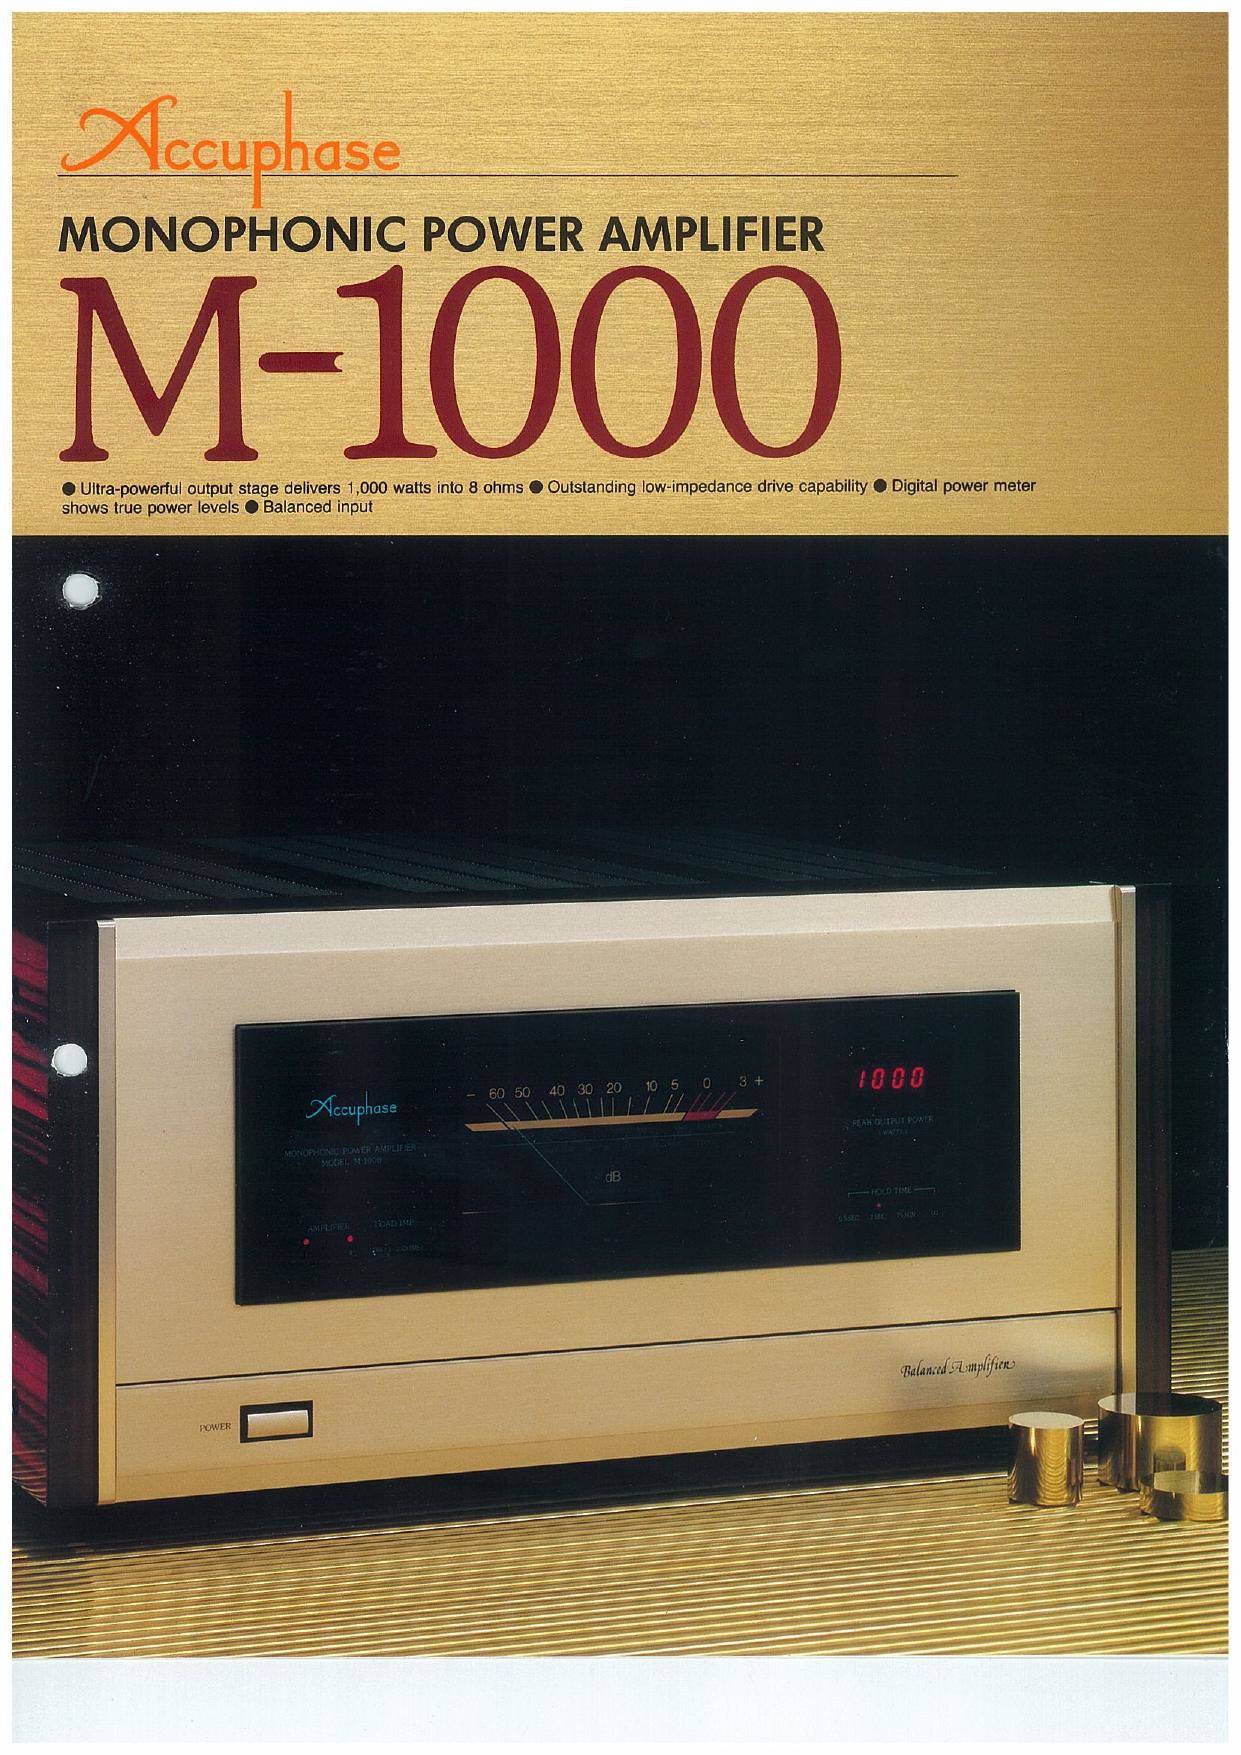 Accuphase M-1000